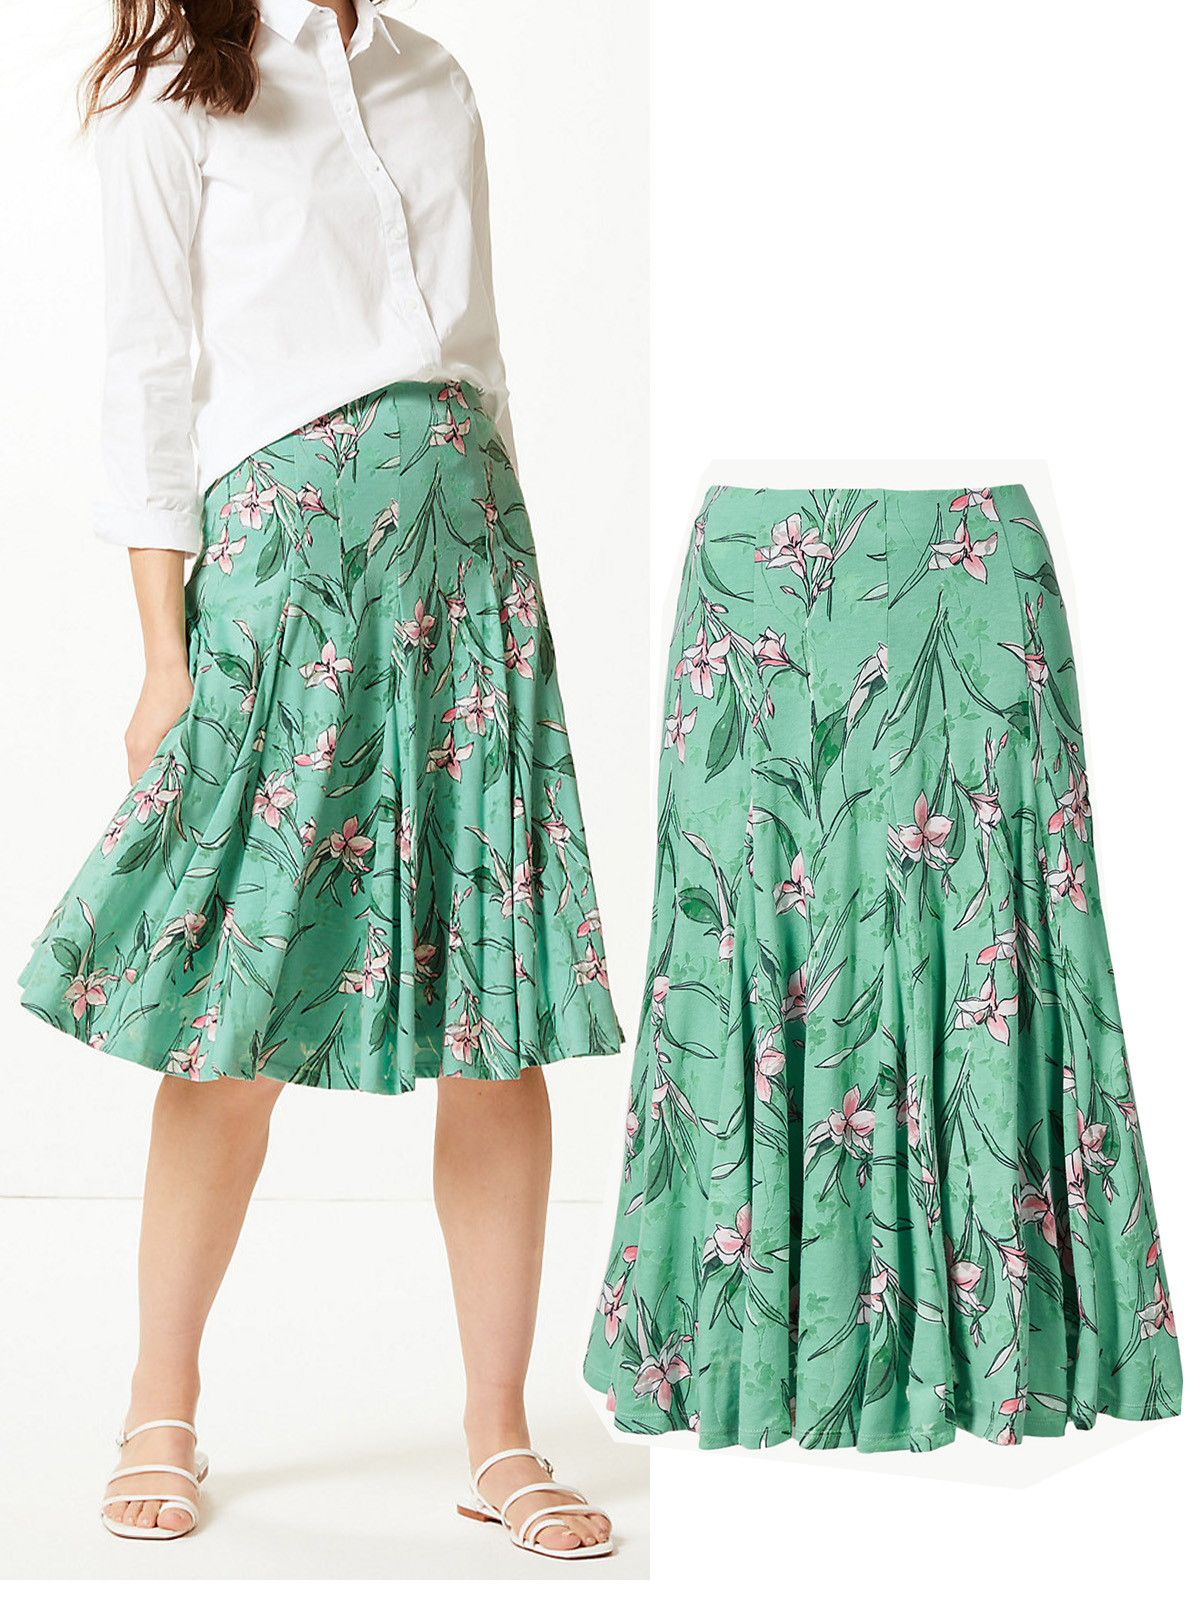 Marks and Spencer - - M&5 MINT Floral Print Jersey Fit & Flare Skirt ...